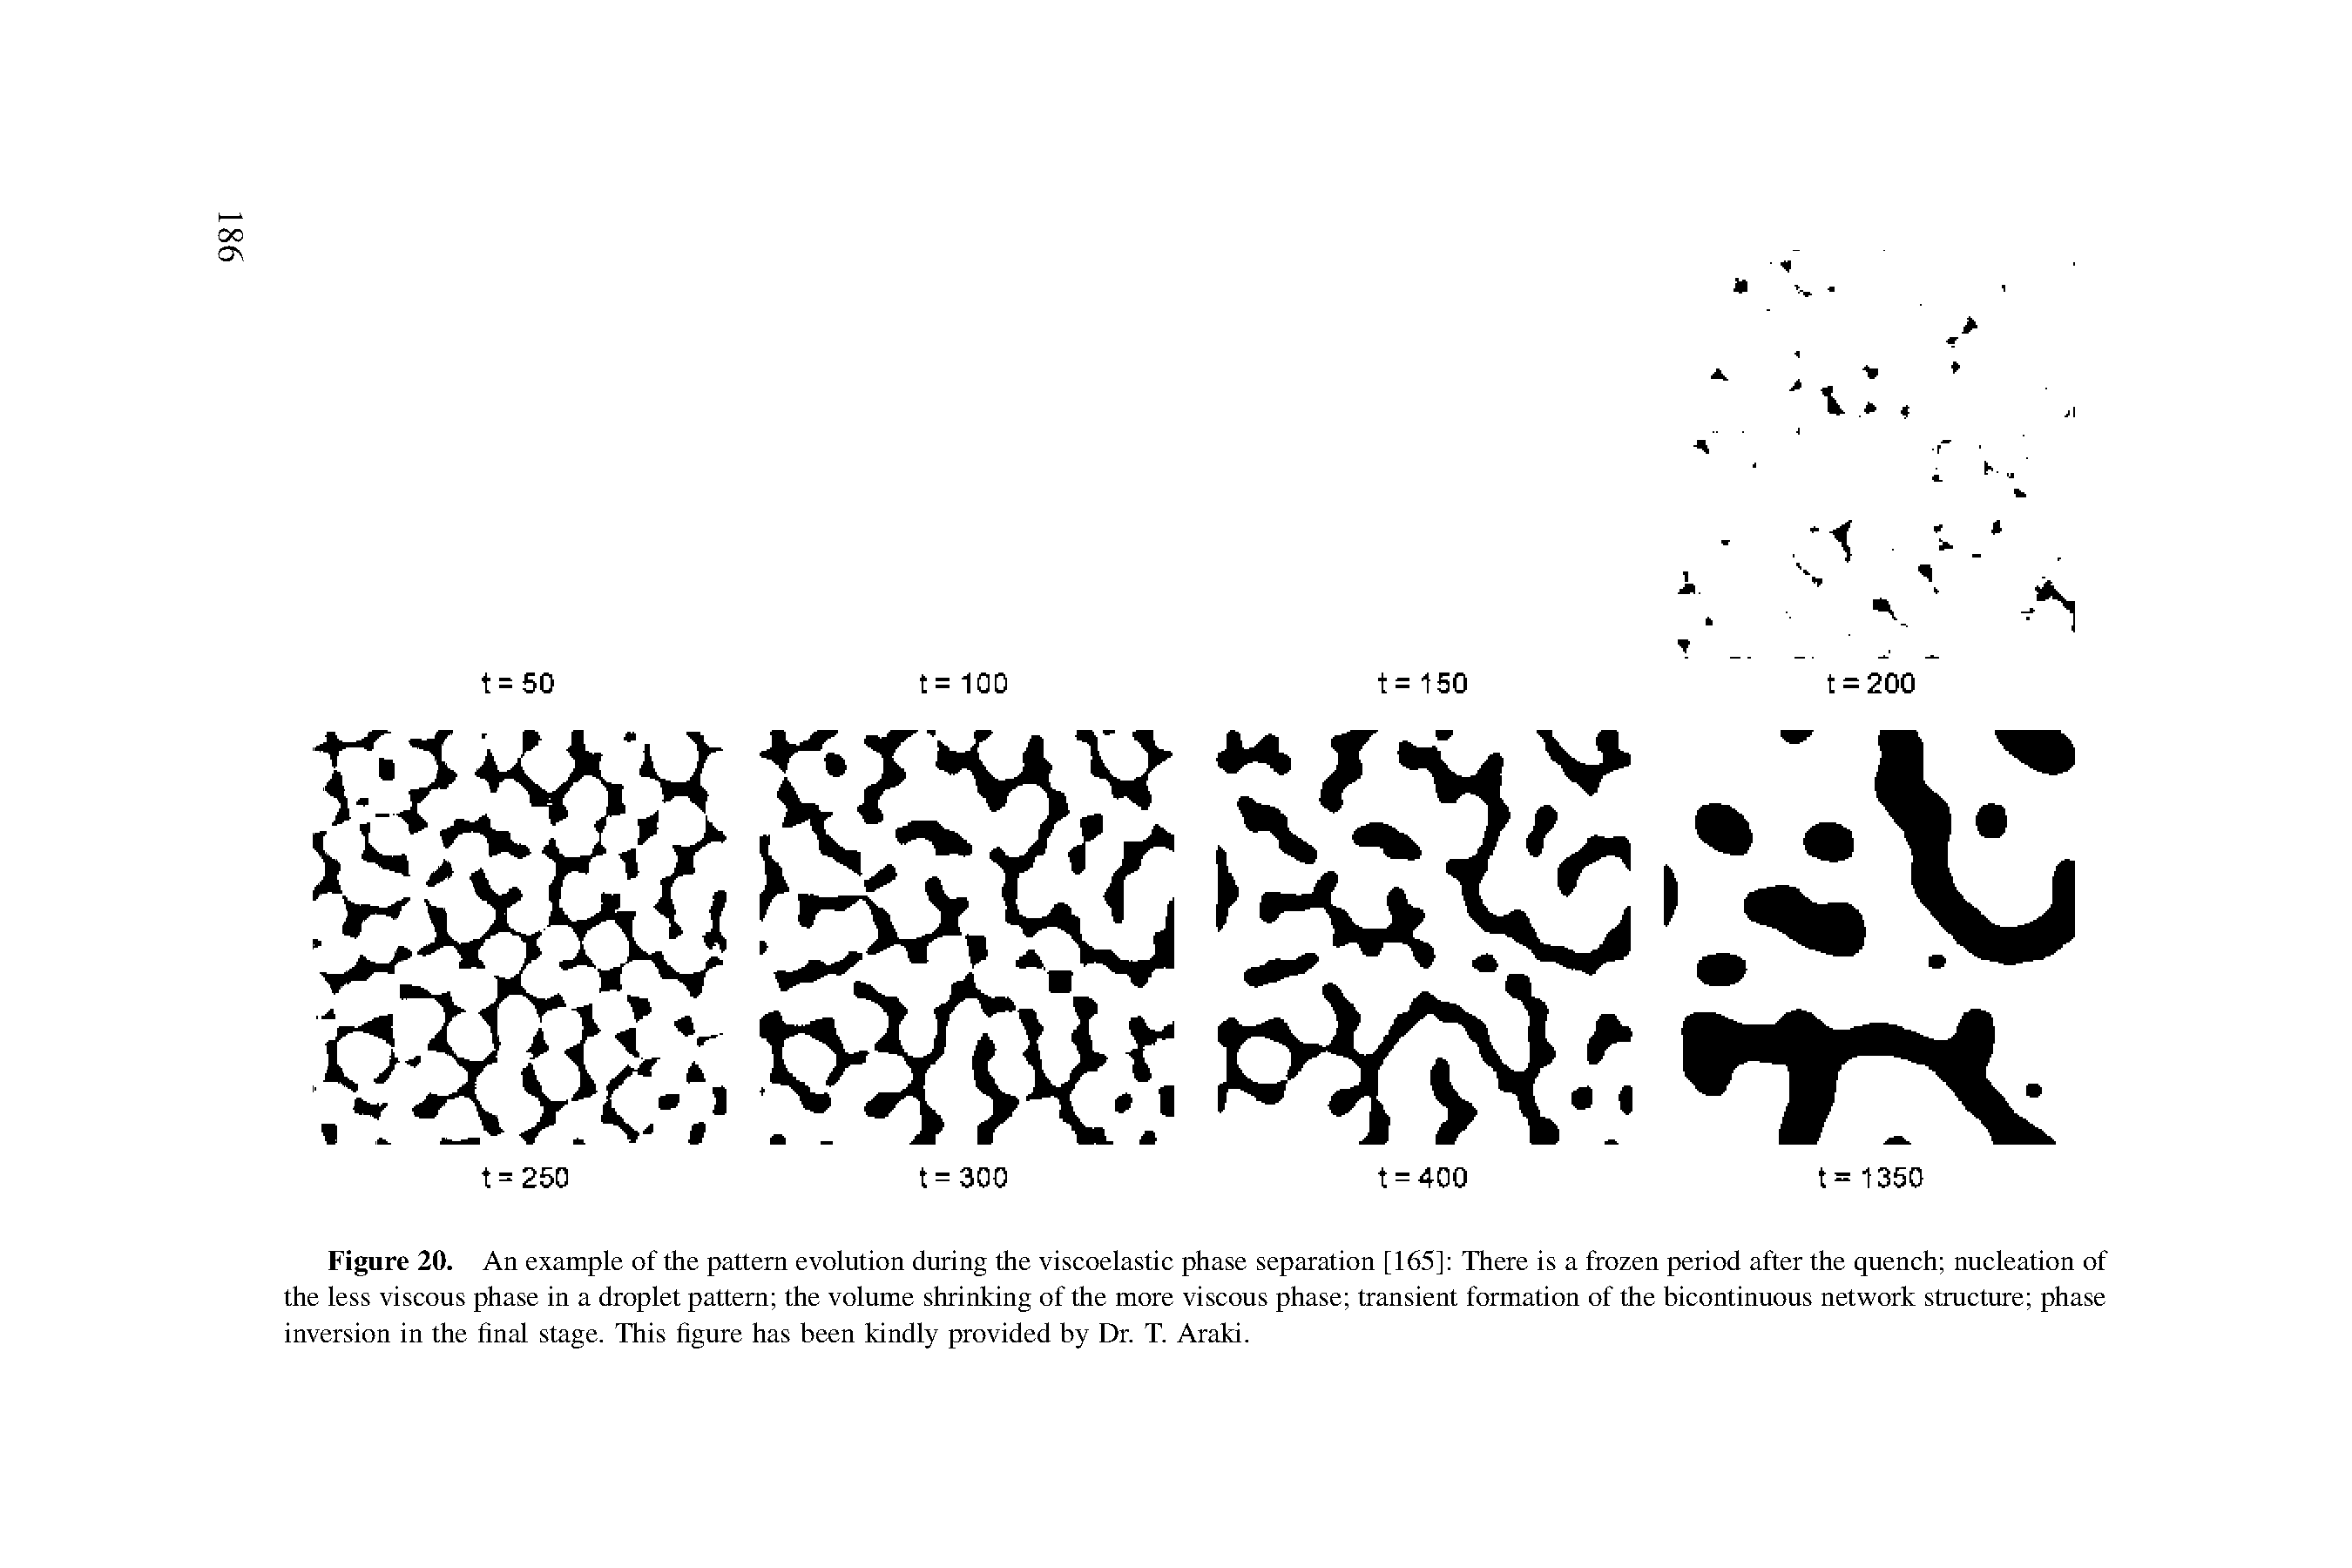 Figure 20. An example of the pattern evolution during the viscoelastic phase separation [165] There is a frozen period after the quench nucleation of the less viscous phase in a droplet pattern the volume shrinking of the more viscous phase transient formation of the bicontinuous network structure phase inversion in the final stage. This figure has been kindly provided by Dr. T. Araki.